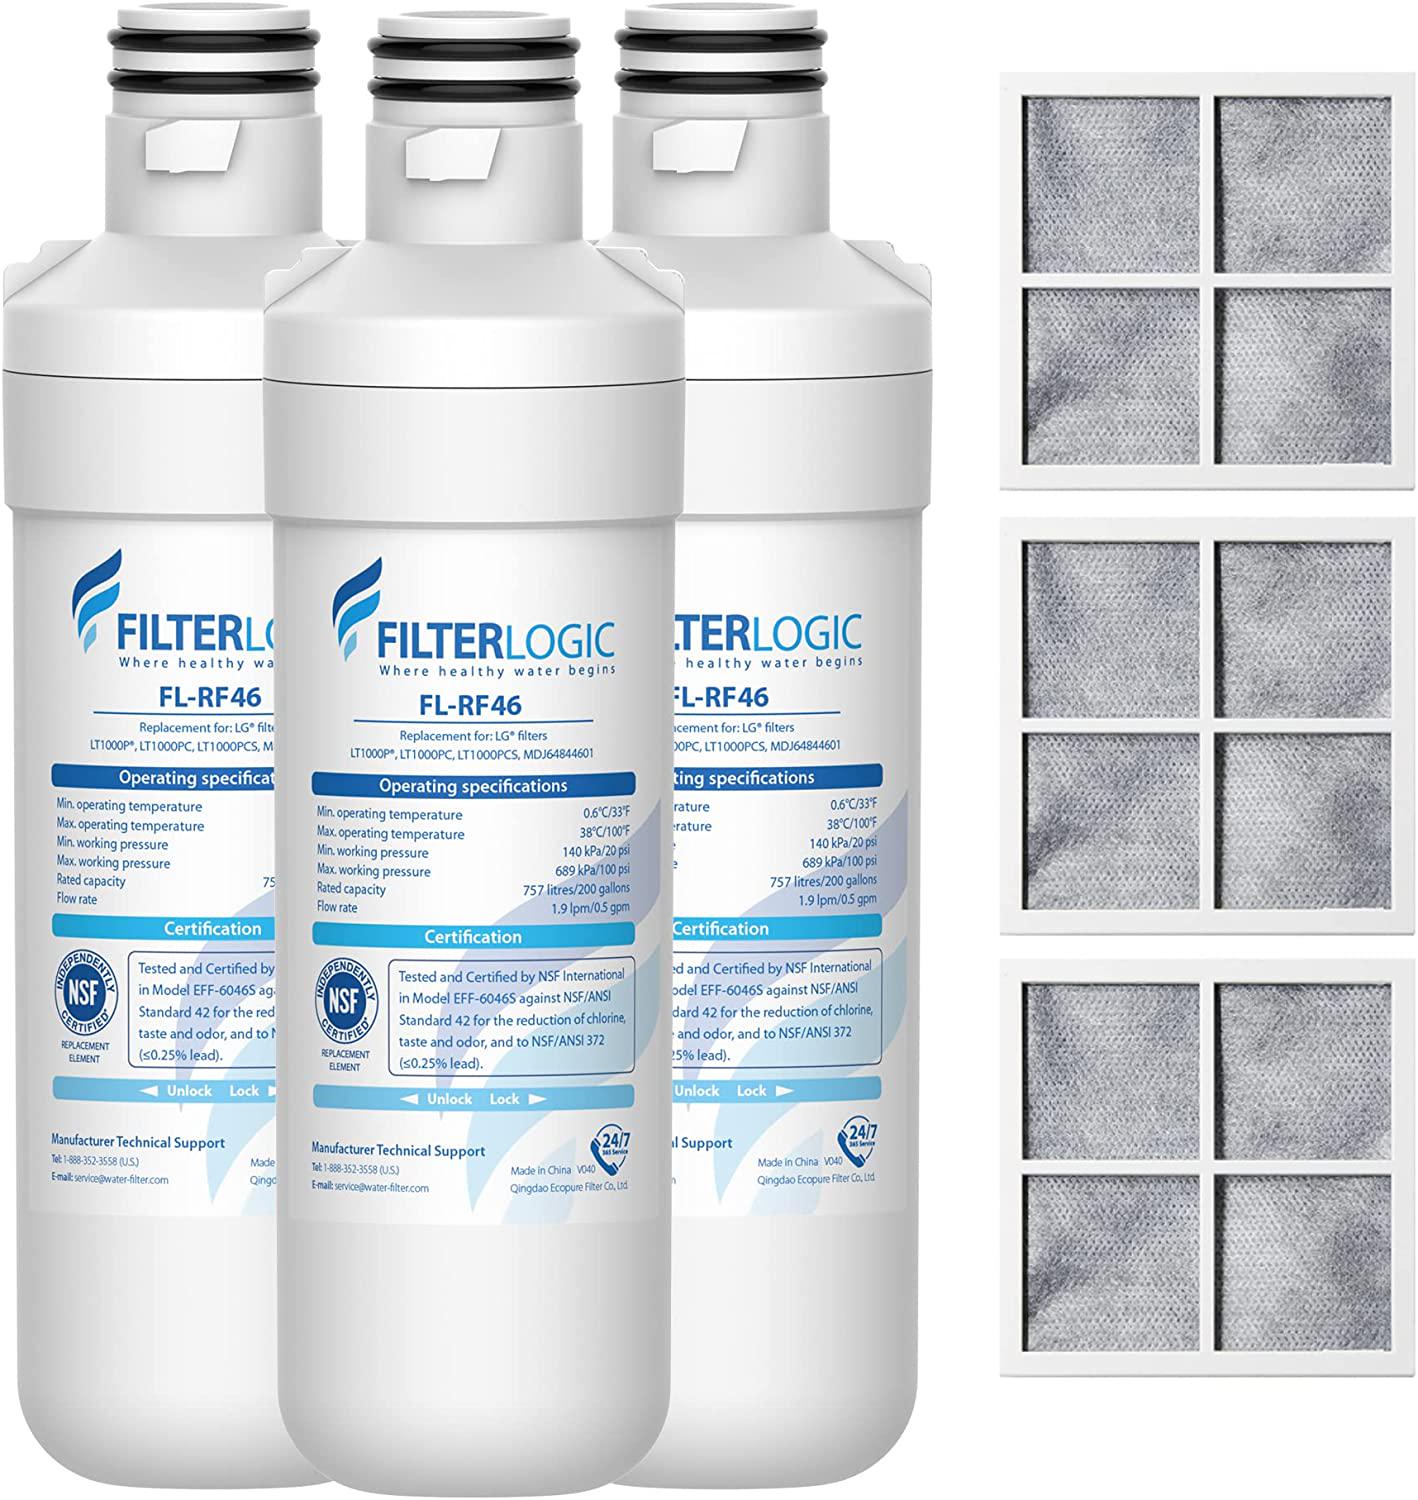 Filterlogic, FilterLogic LT1000PC ADQ747935 MDJ64844601 NSF Certified Refrigerator Water Filter and Air Filter, Replacement for LGÂ LT1000PÂ , LT1000PC, LT-1000PC MDJ64844601 and LT120FÂ , 3 Combo, Package may vary